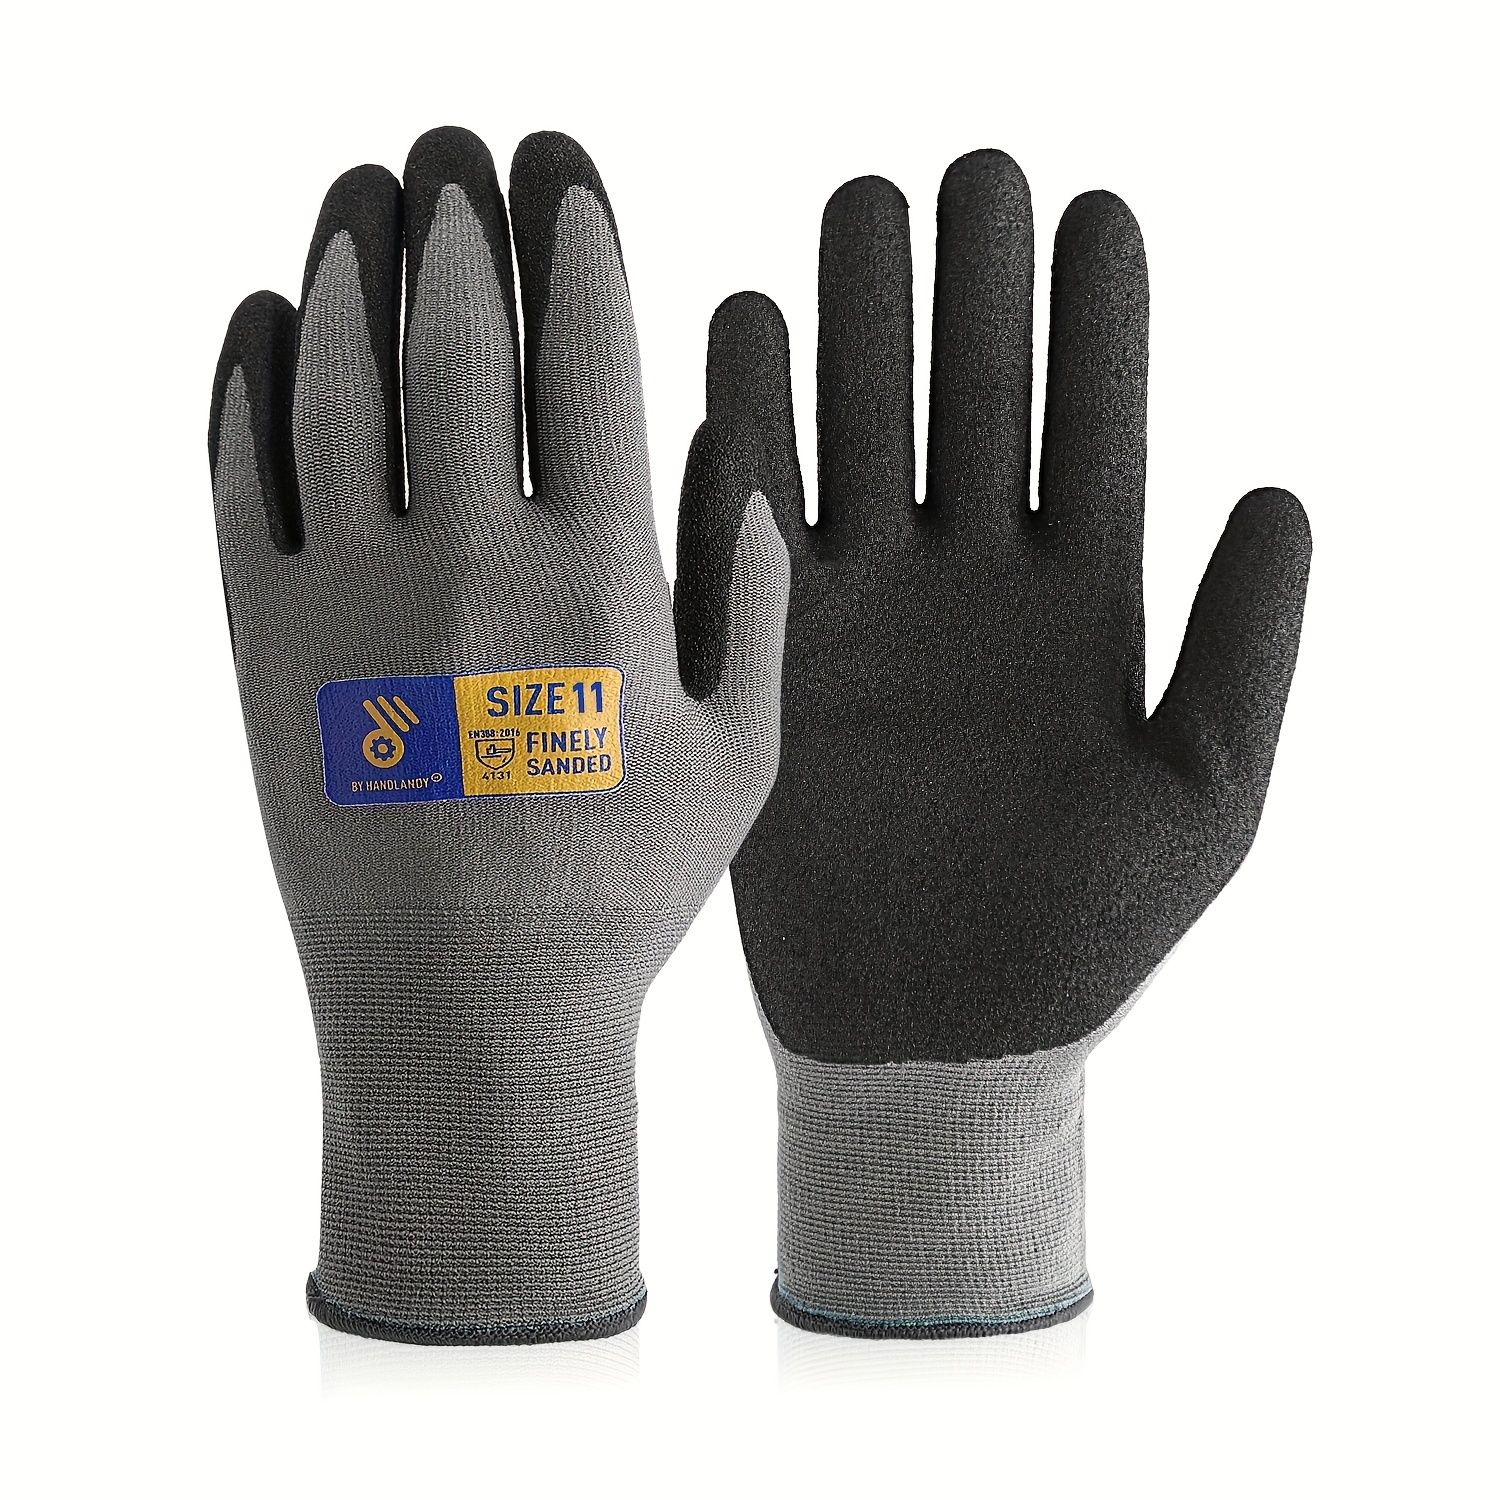 HANDLANDY Utility Work Gloves with Silicone Grip for Women, Thin